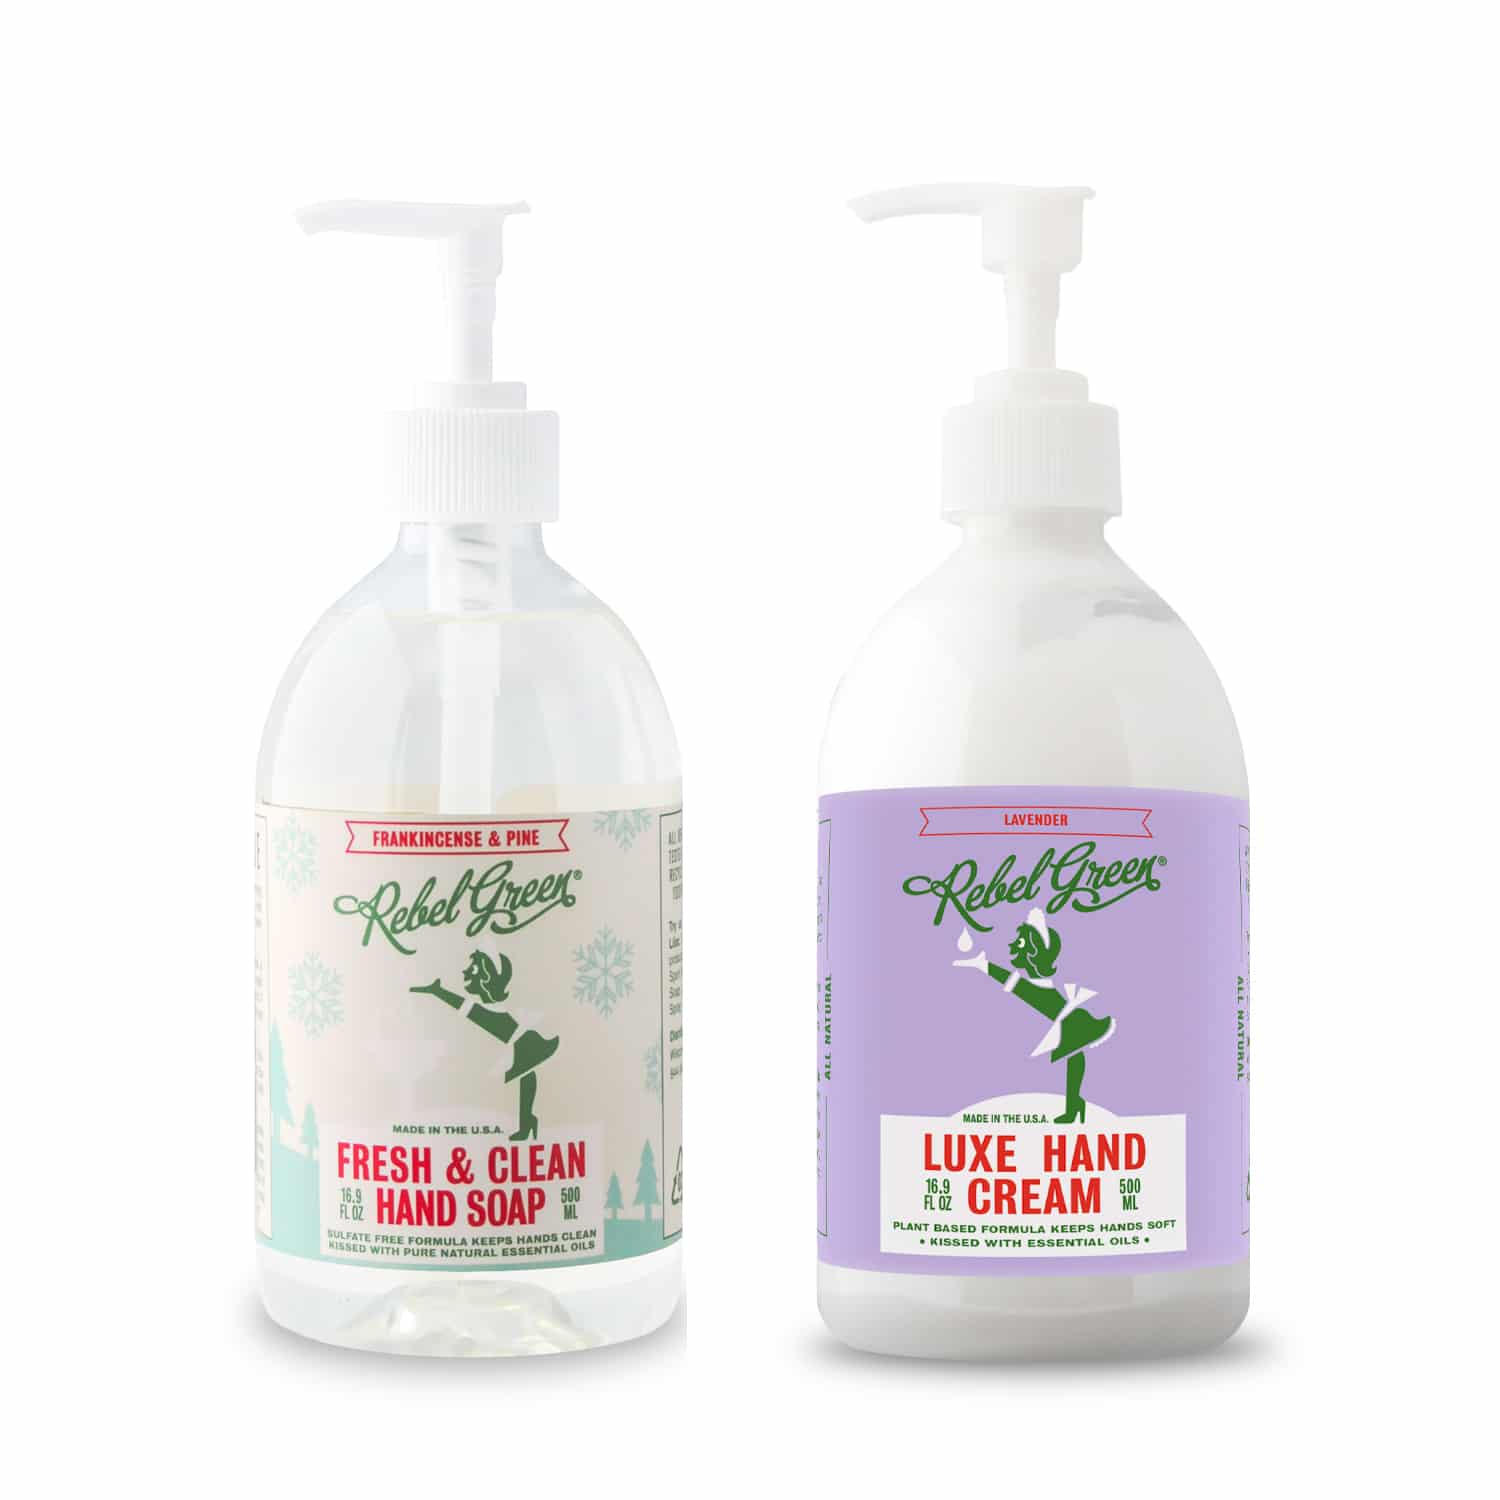 Rebel Green Fresh & Clean Hand Soap Luxe Hand Cream Frankincense Pine Lavender mother gift